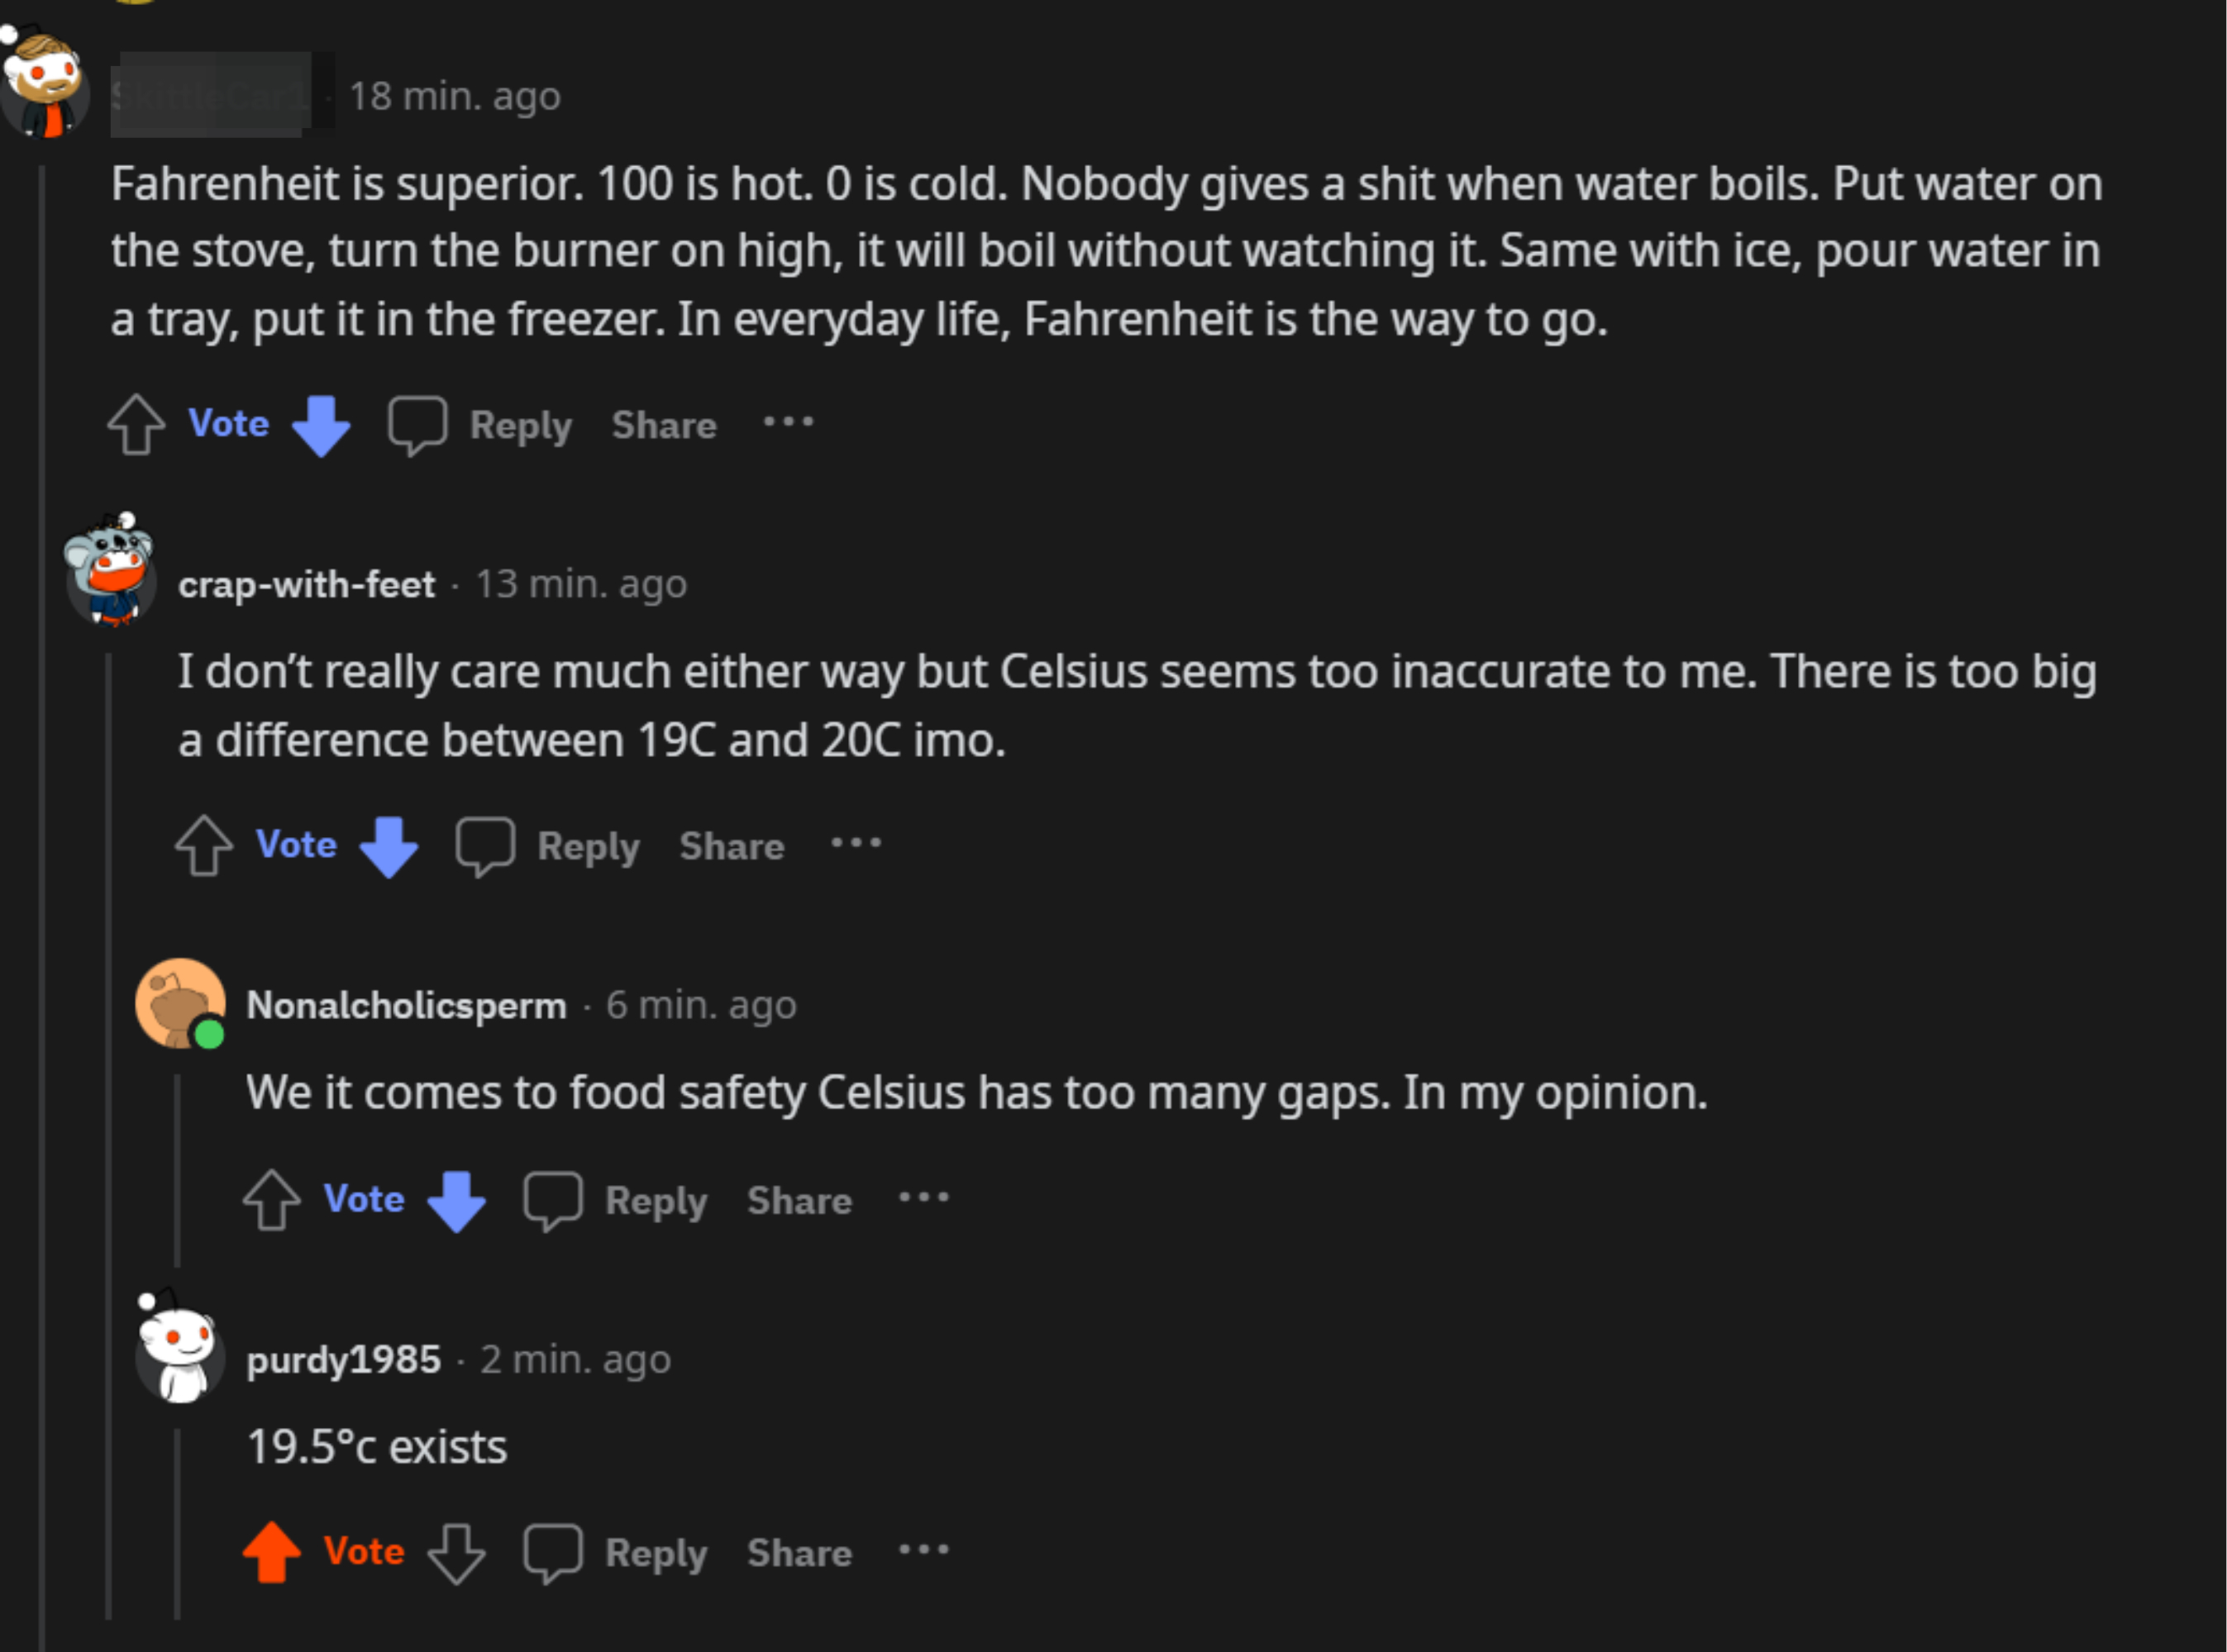 &quot;Fahrenheit is superior: 100 is hot, 0 is cold; nobody gives a shit when water boils,&quot; &quot;I don&#x27;t really care much either way but Celsius seems too inaccurate to me; there is too big a difference between 19C and 20C,&quot;  and response: &quot;19.5C exists&quot;